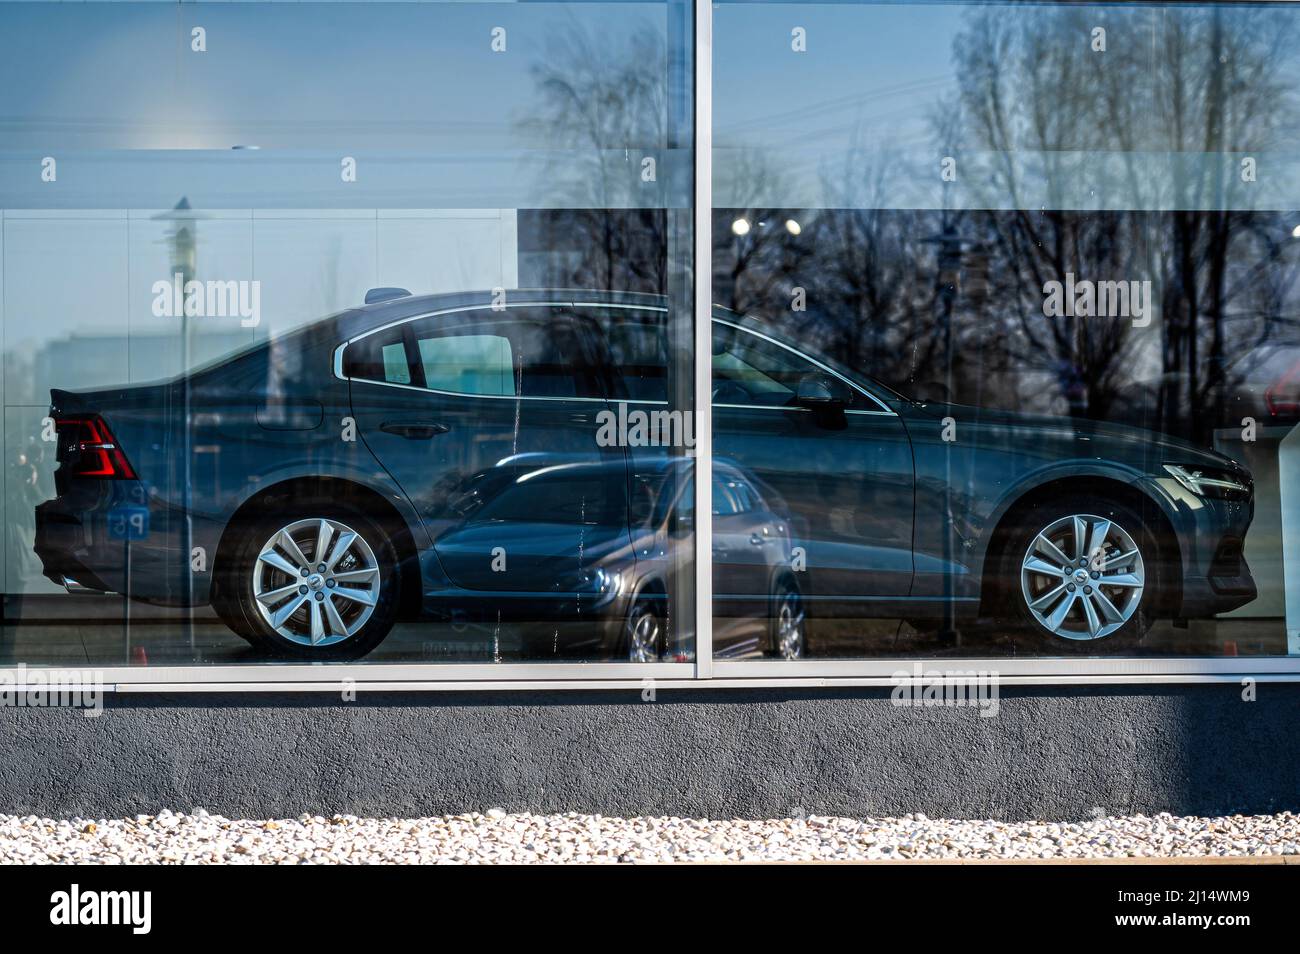 Riga, Latvia, March 18, 2022: View of the new Volvo through the window. The glass reflects the car parked outside. Stock Photo